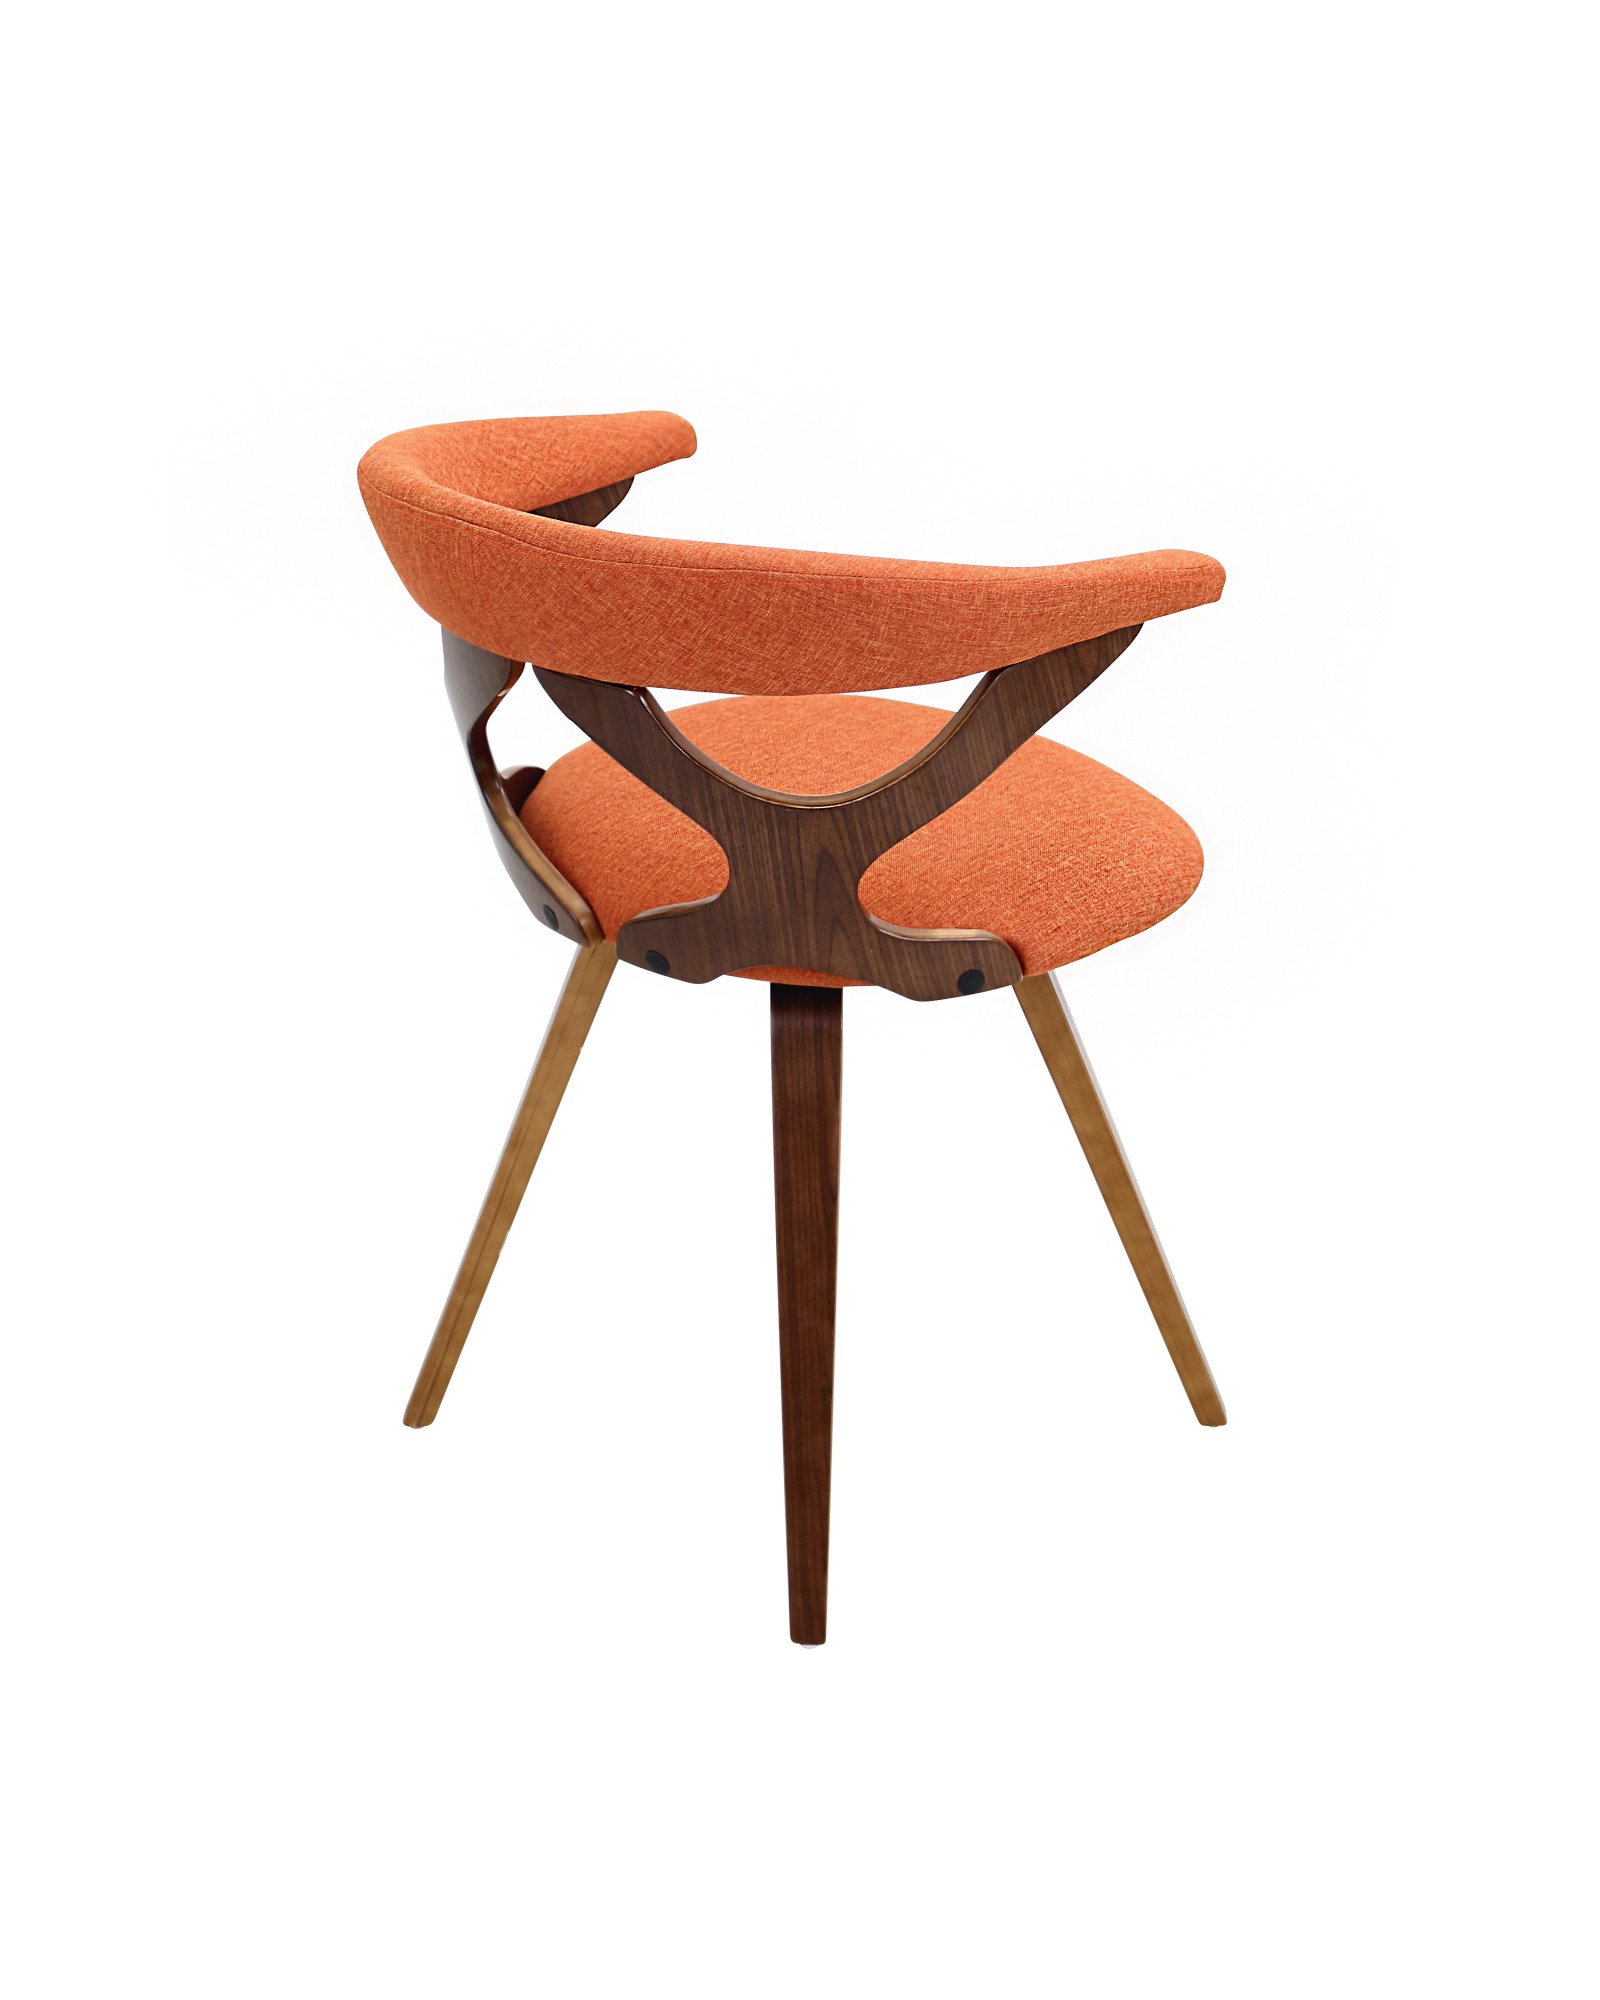 Gardenia Mid-century Modern Dining/Accent Chair with Swivel in Walnut Wood and Orange Fabric